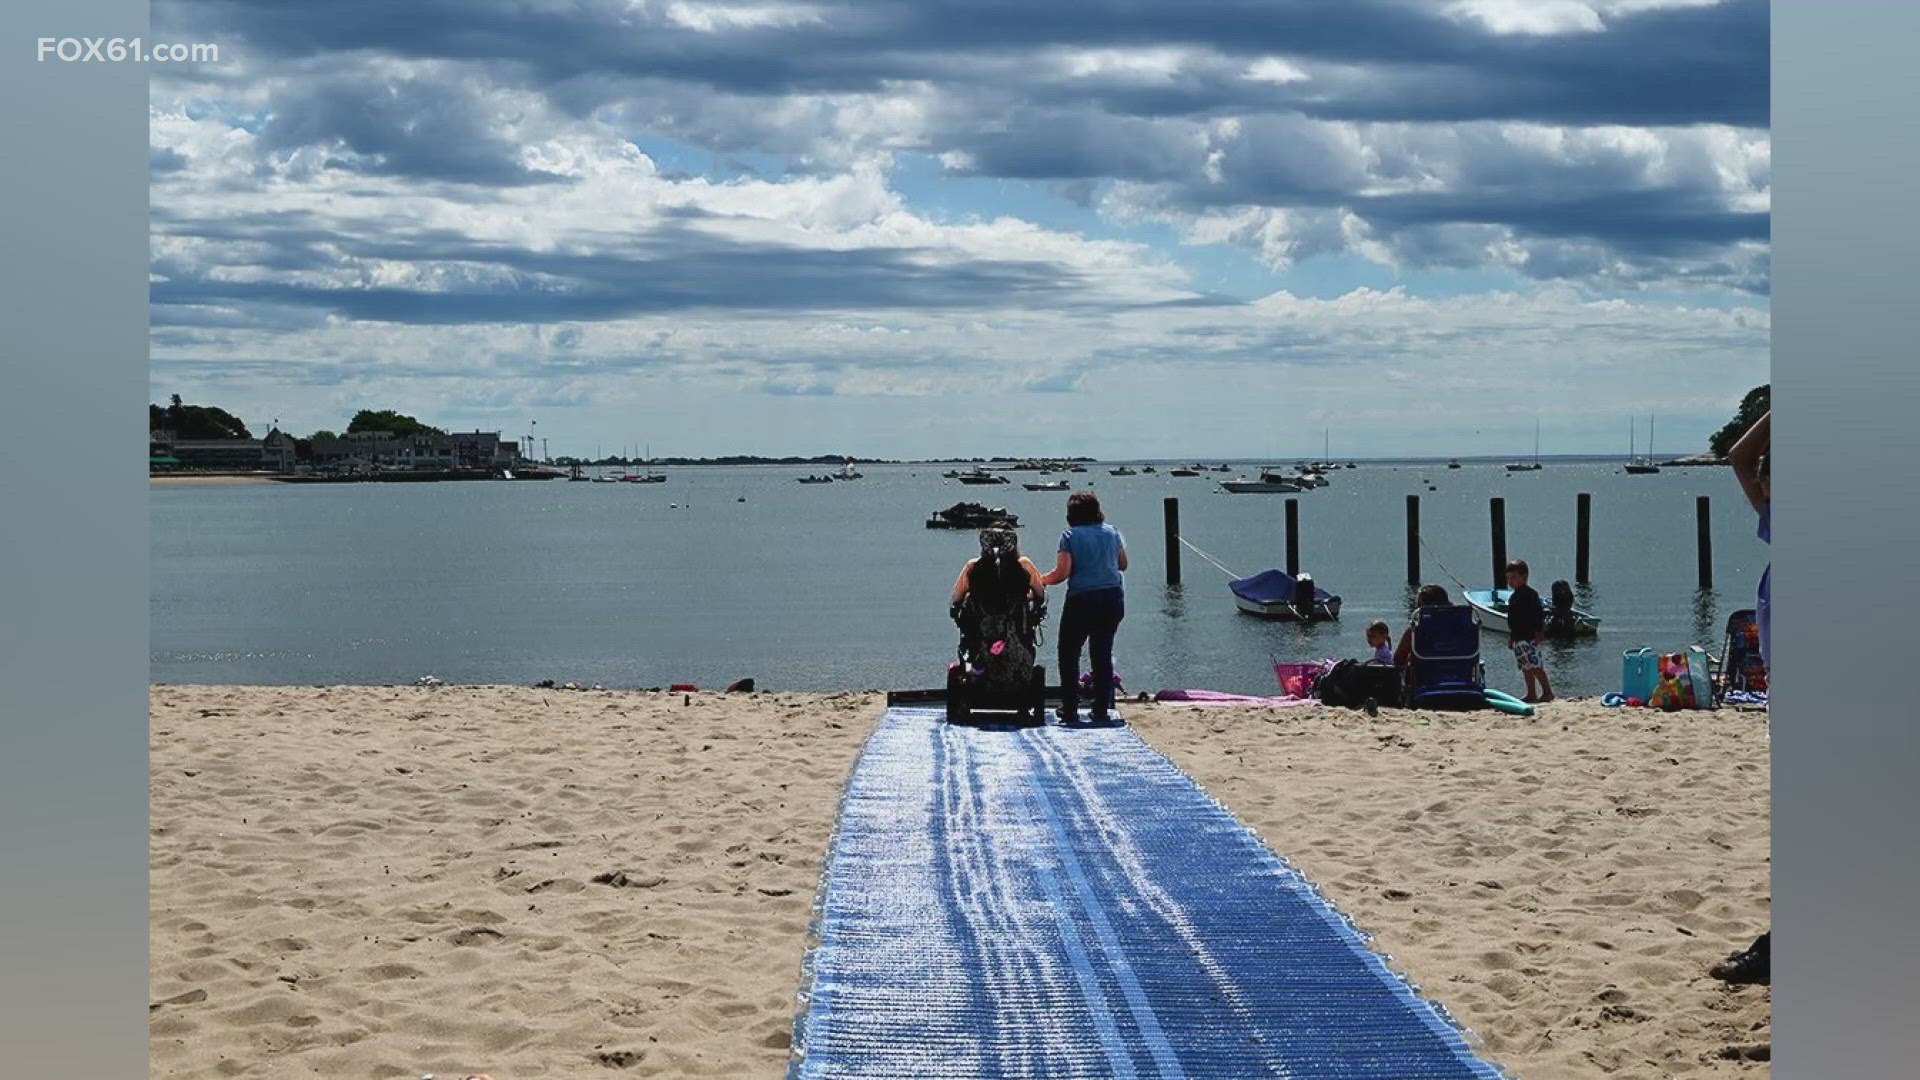 A Madison Girl Scout troop raised funds to put an accessible mat on the beach, and Opportunity Works built wheelchair-accessible picnic tables.